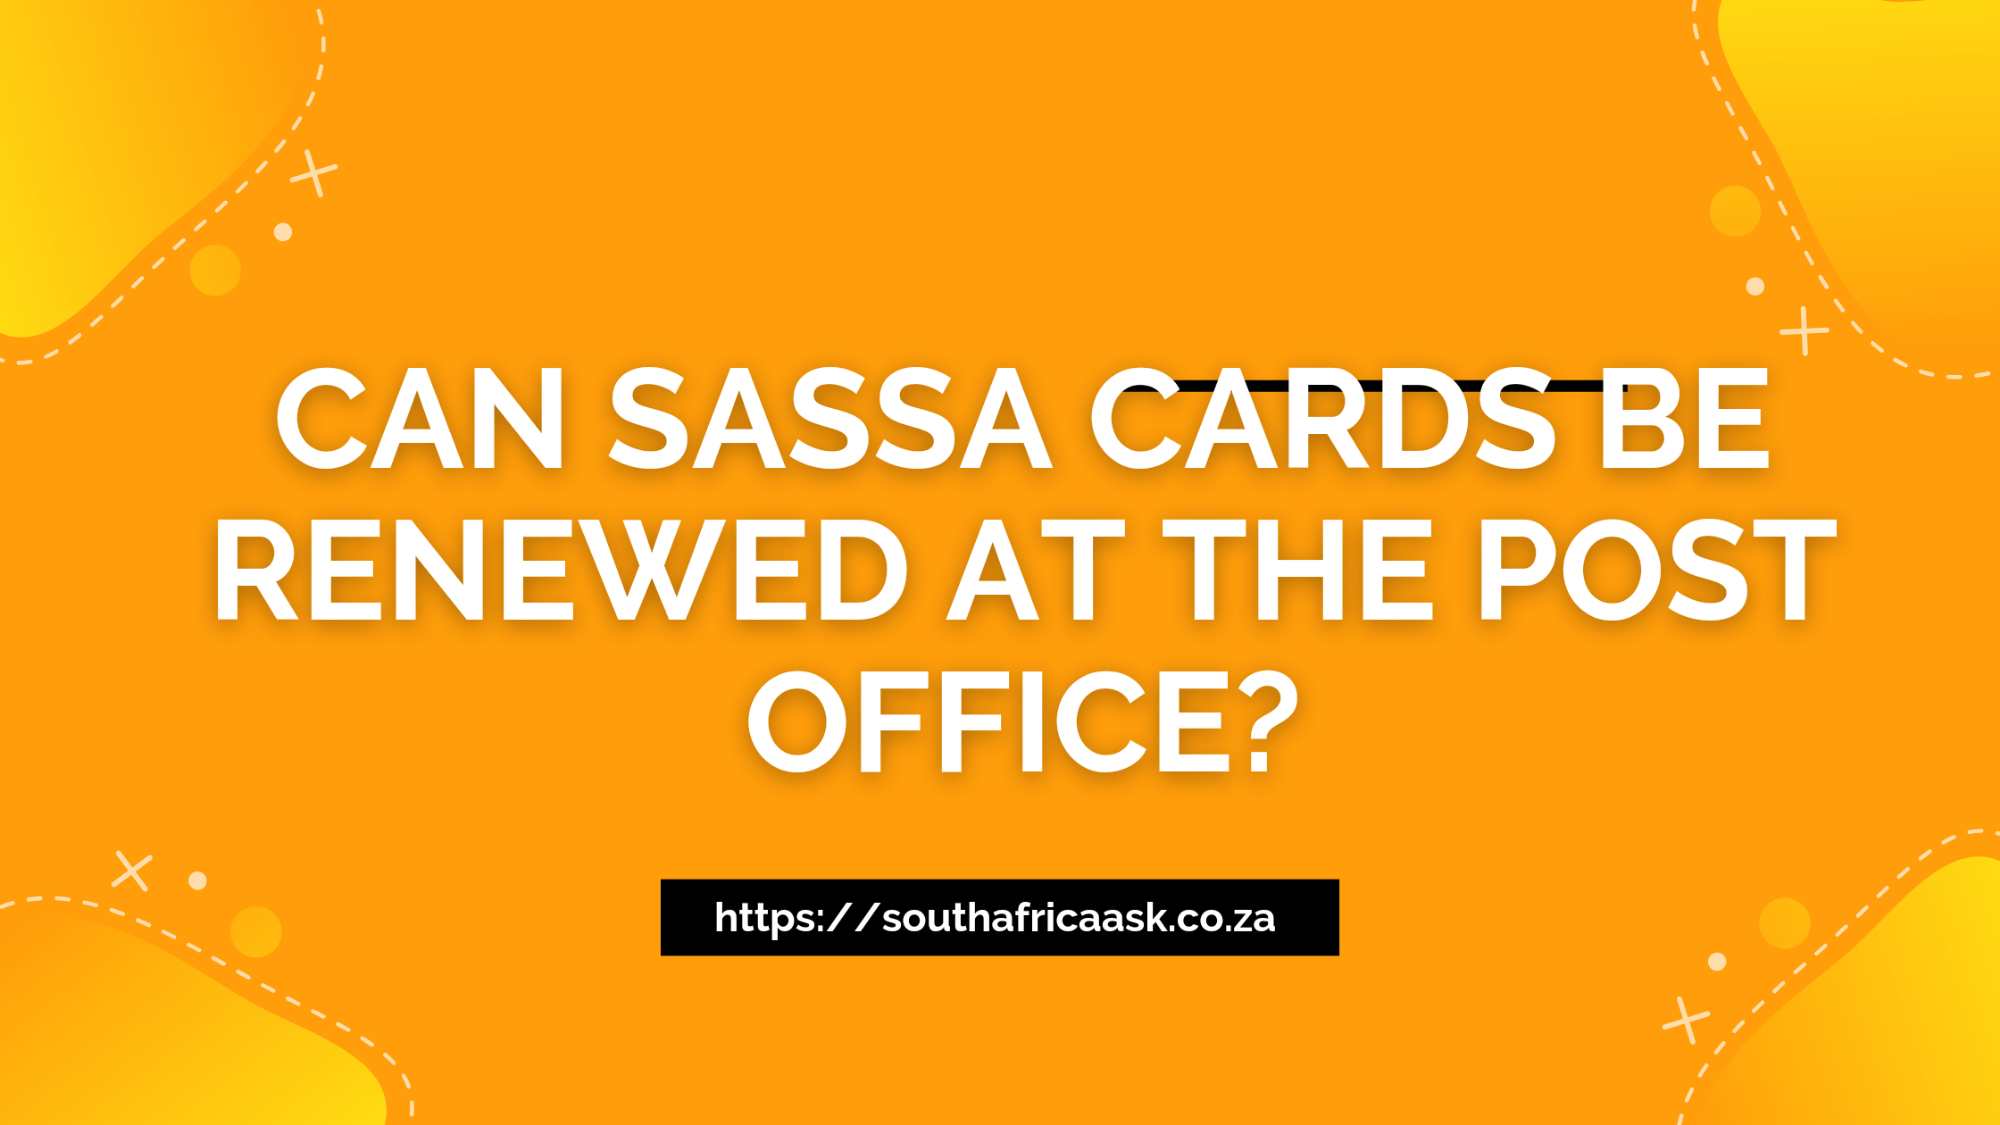 Can SASSA Cards Be Renewed at the Post Office?